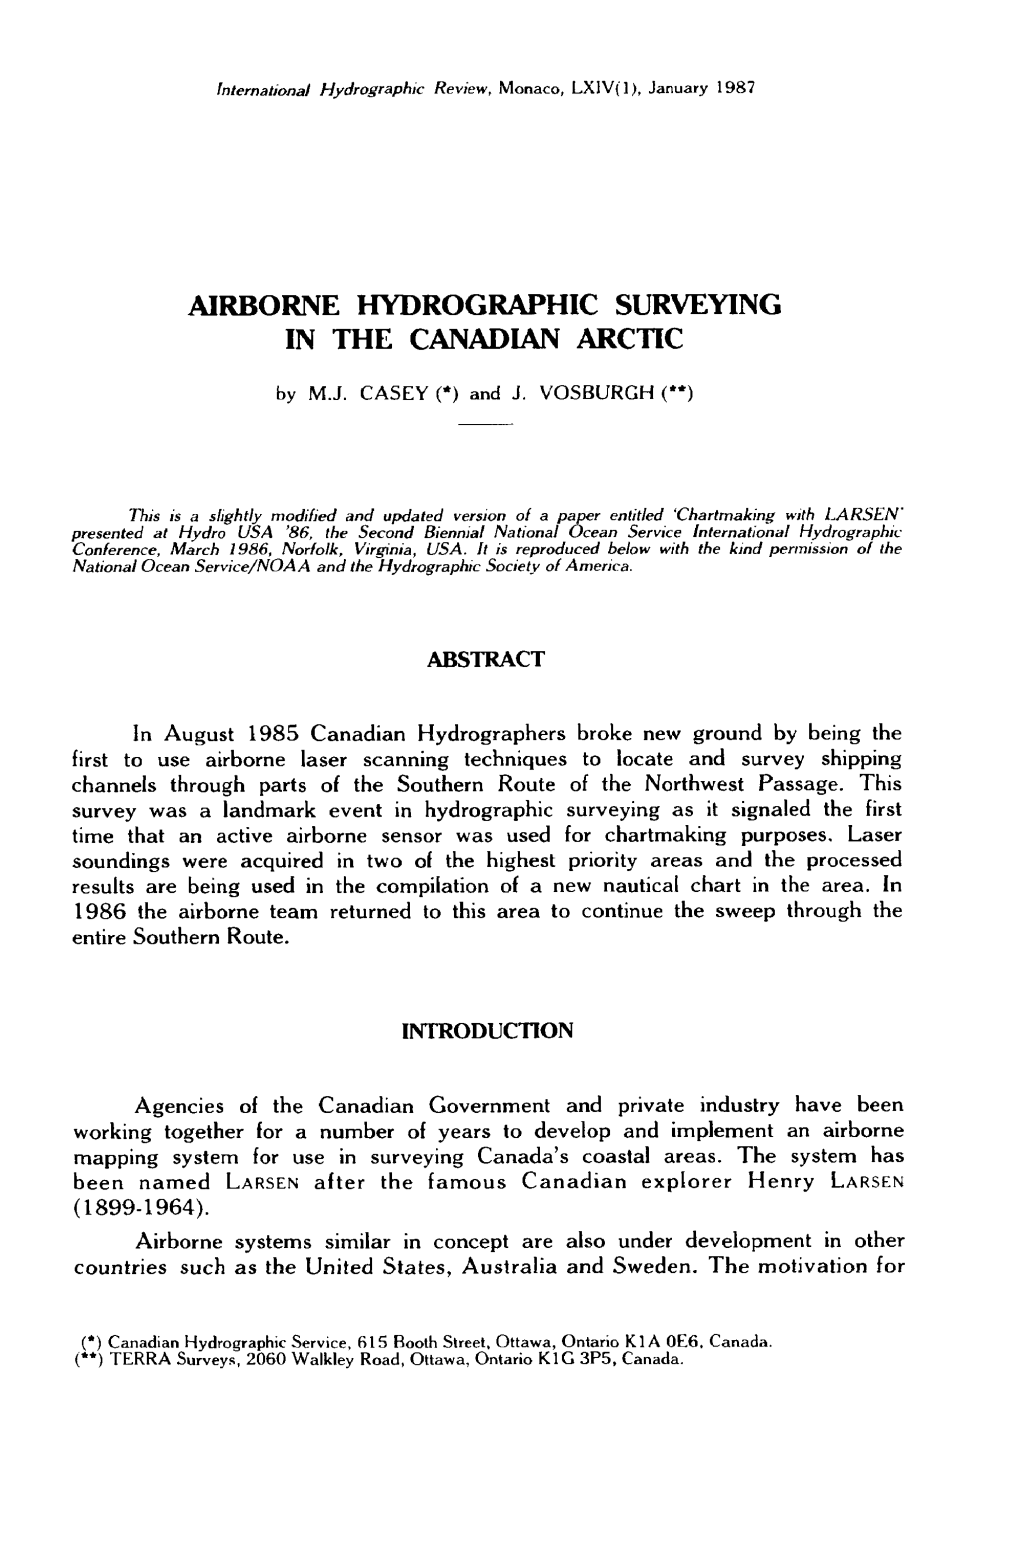 Airborne Hydrographic Surveying in the Canadian Arctic